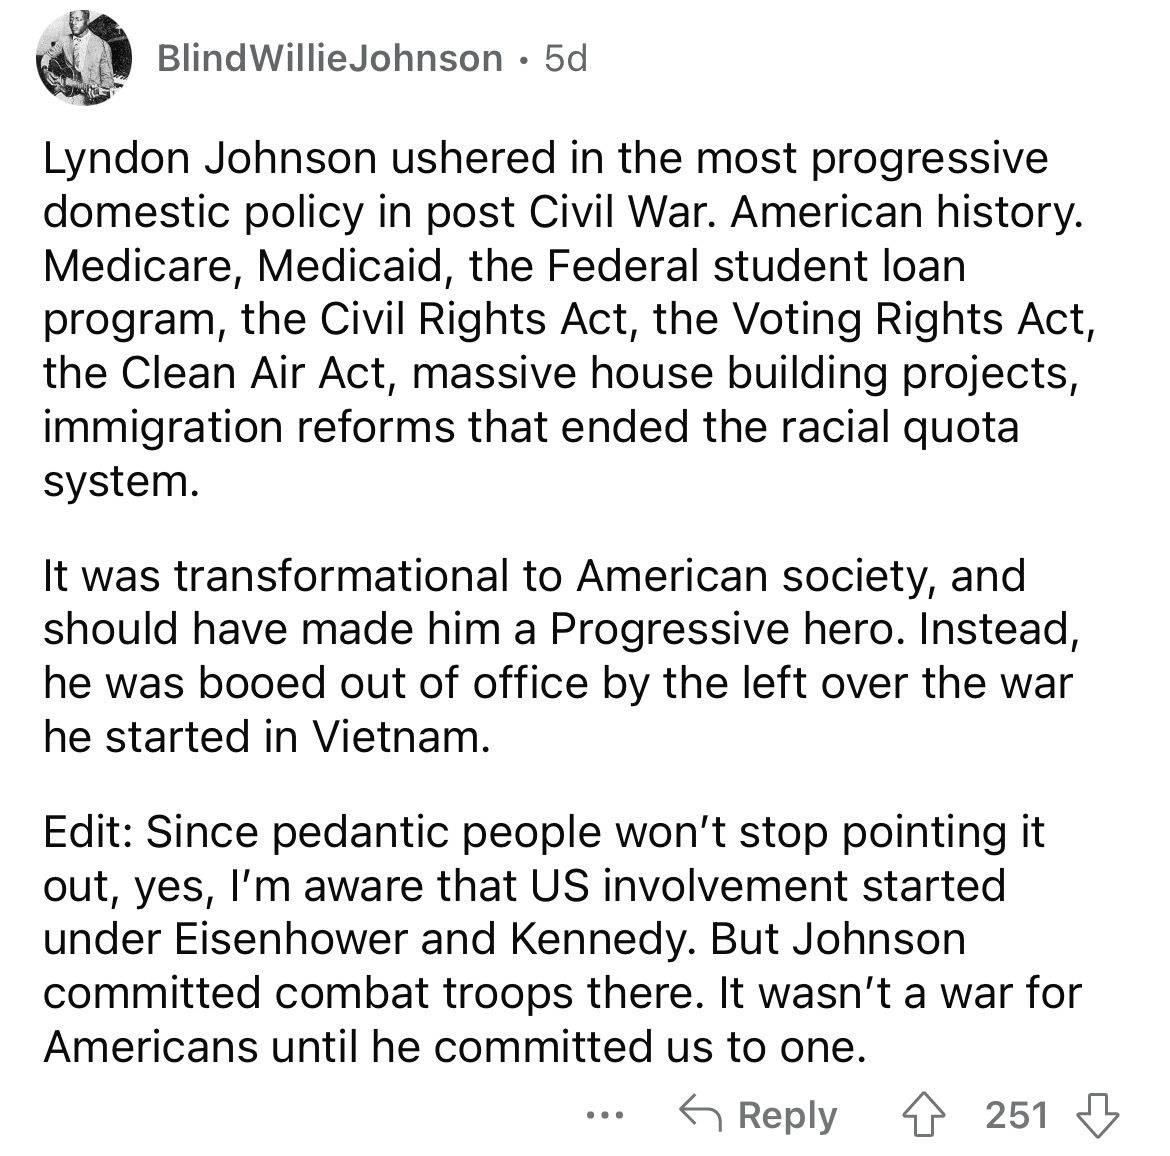 angle - Blind Willie Johnson 5d Lyndon Johnson ushered in the most progressive domestic policy in post Civil War. American history. Medicare, Medicaid, the Federal student loan program, the Civil Rights Act, the Voting Rights Act, the Clean Air Act, massi